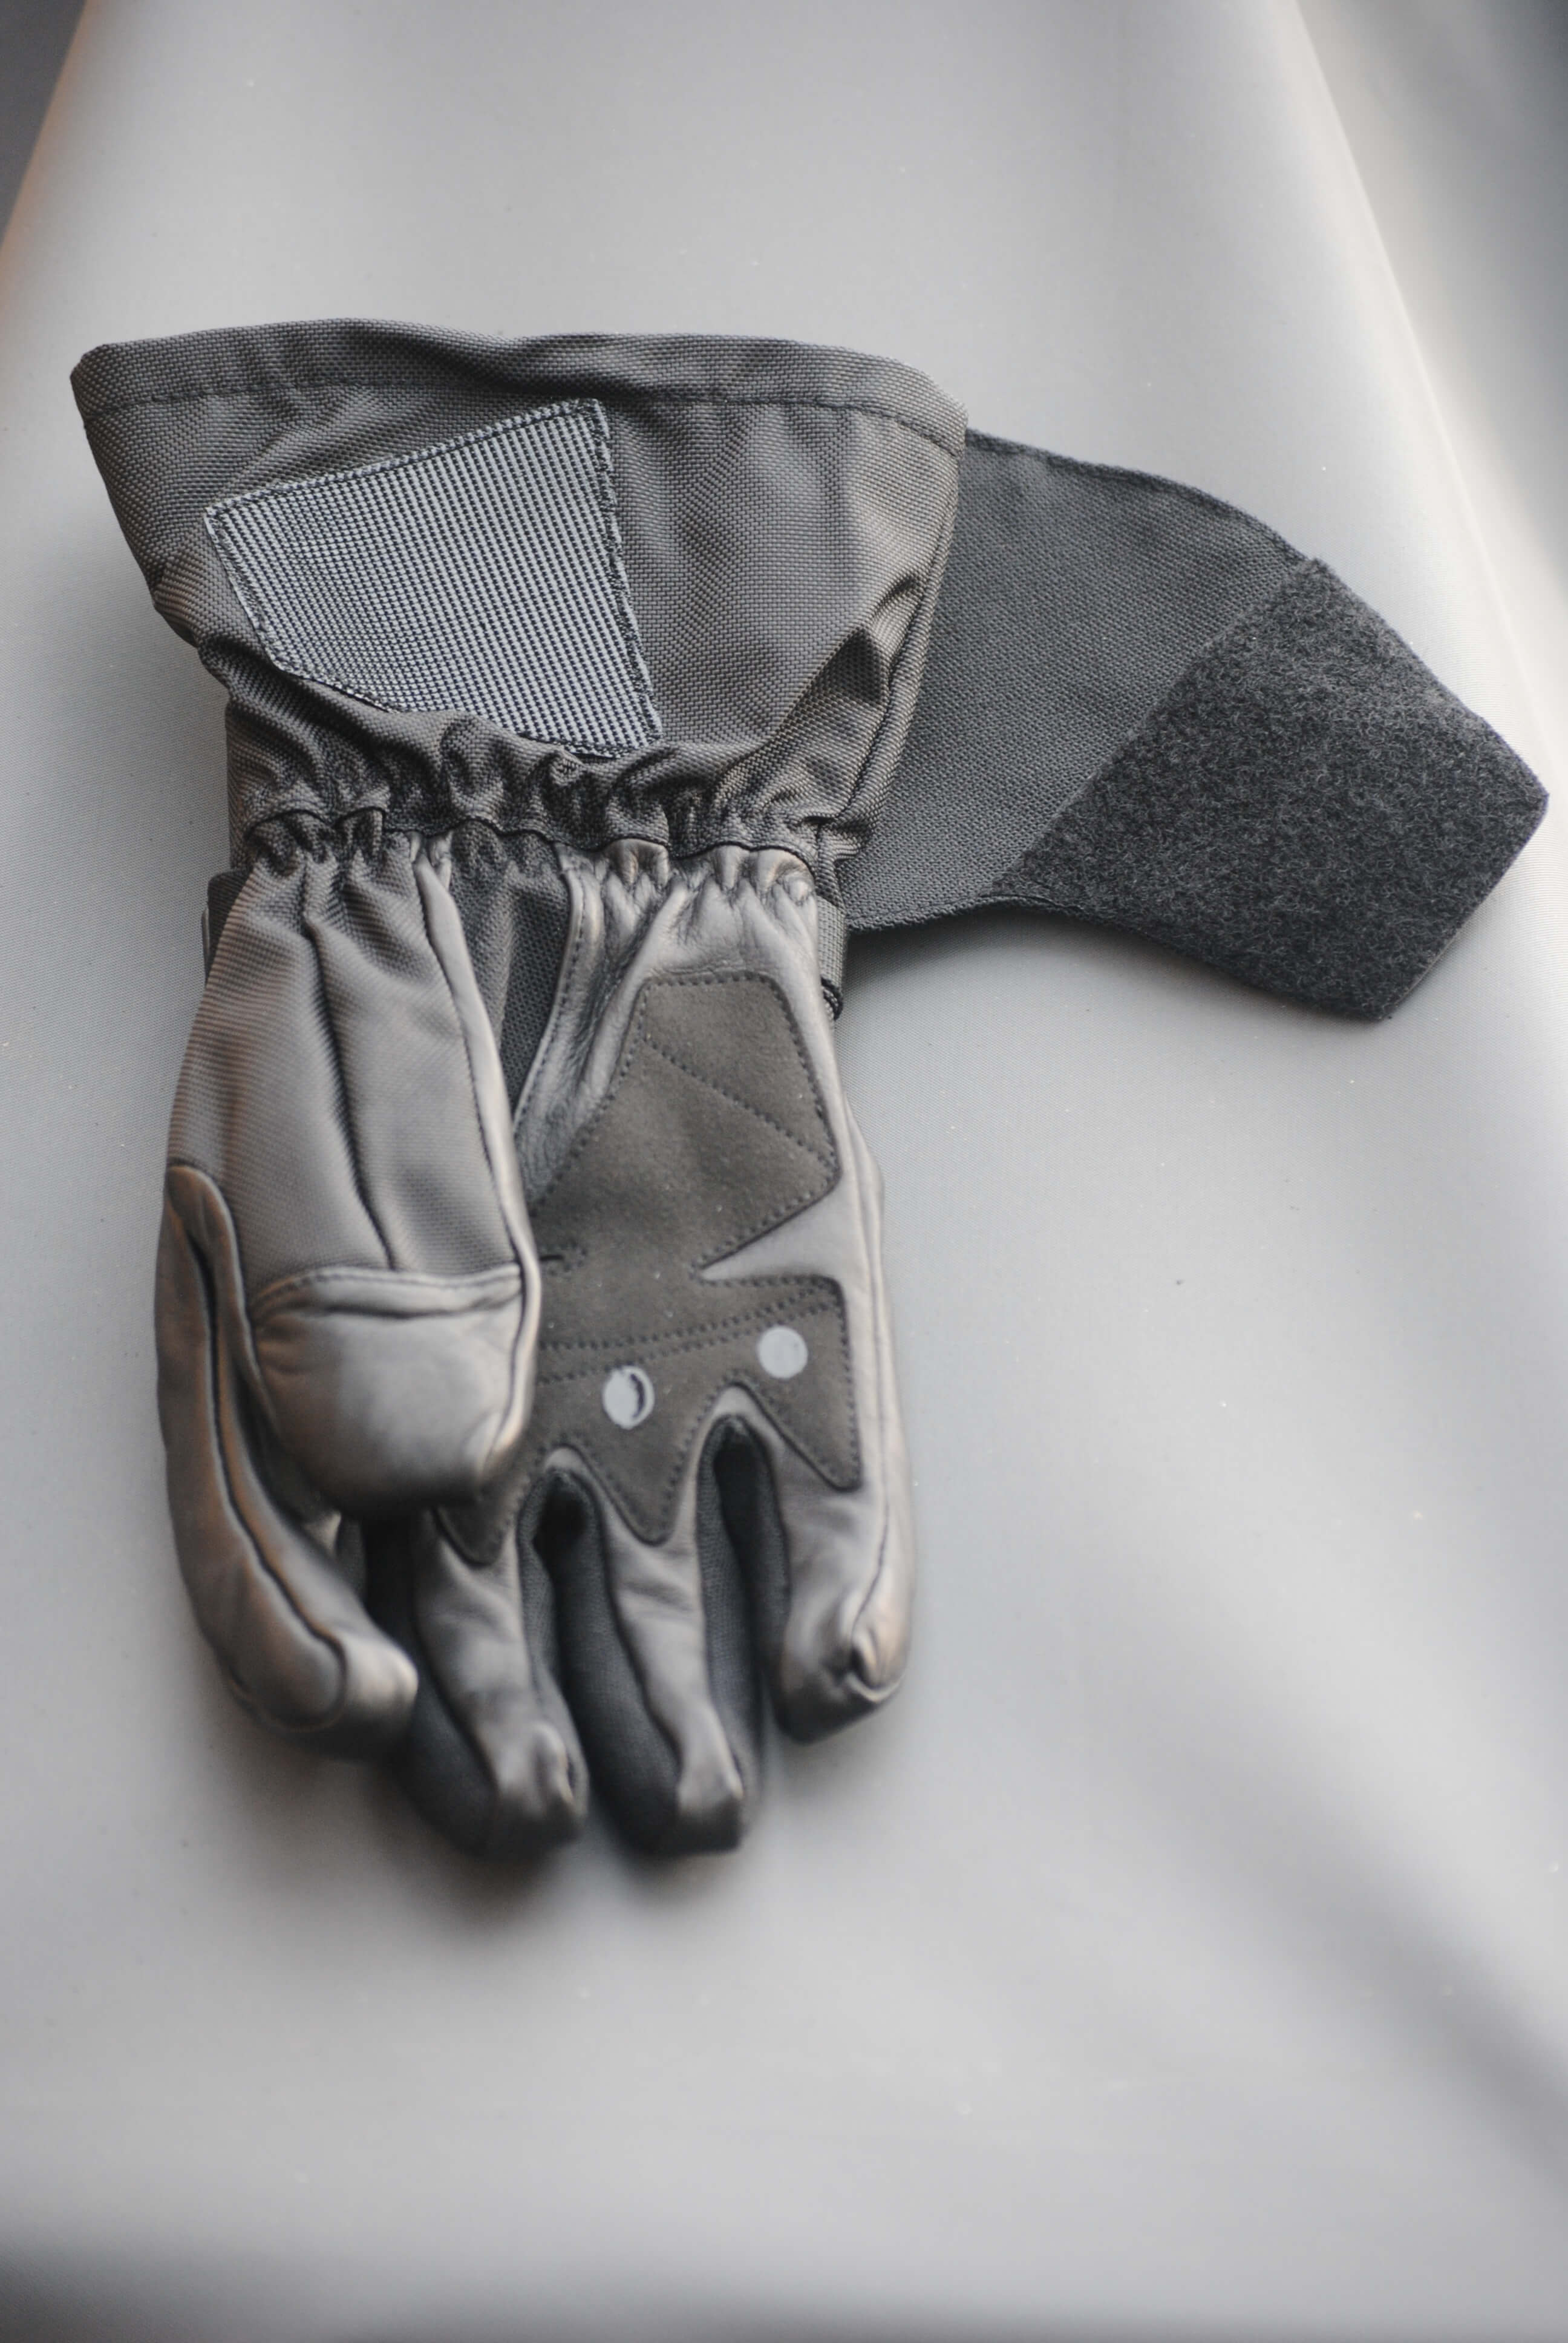 ICON Patrol Waterproof Gloves Hands-On Review